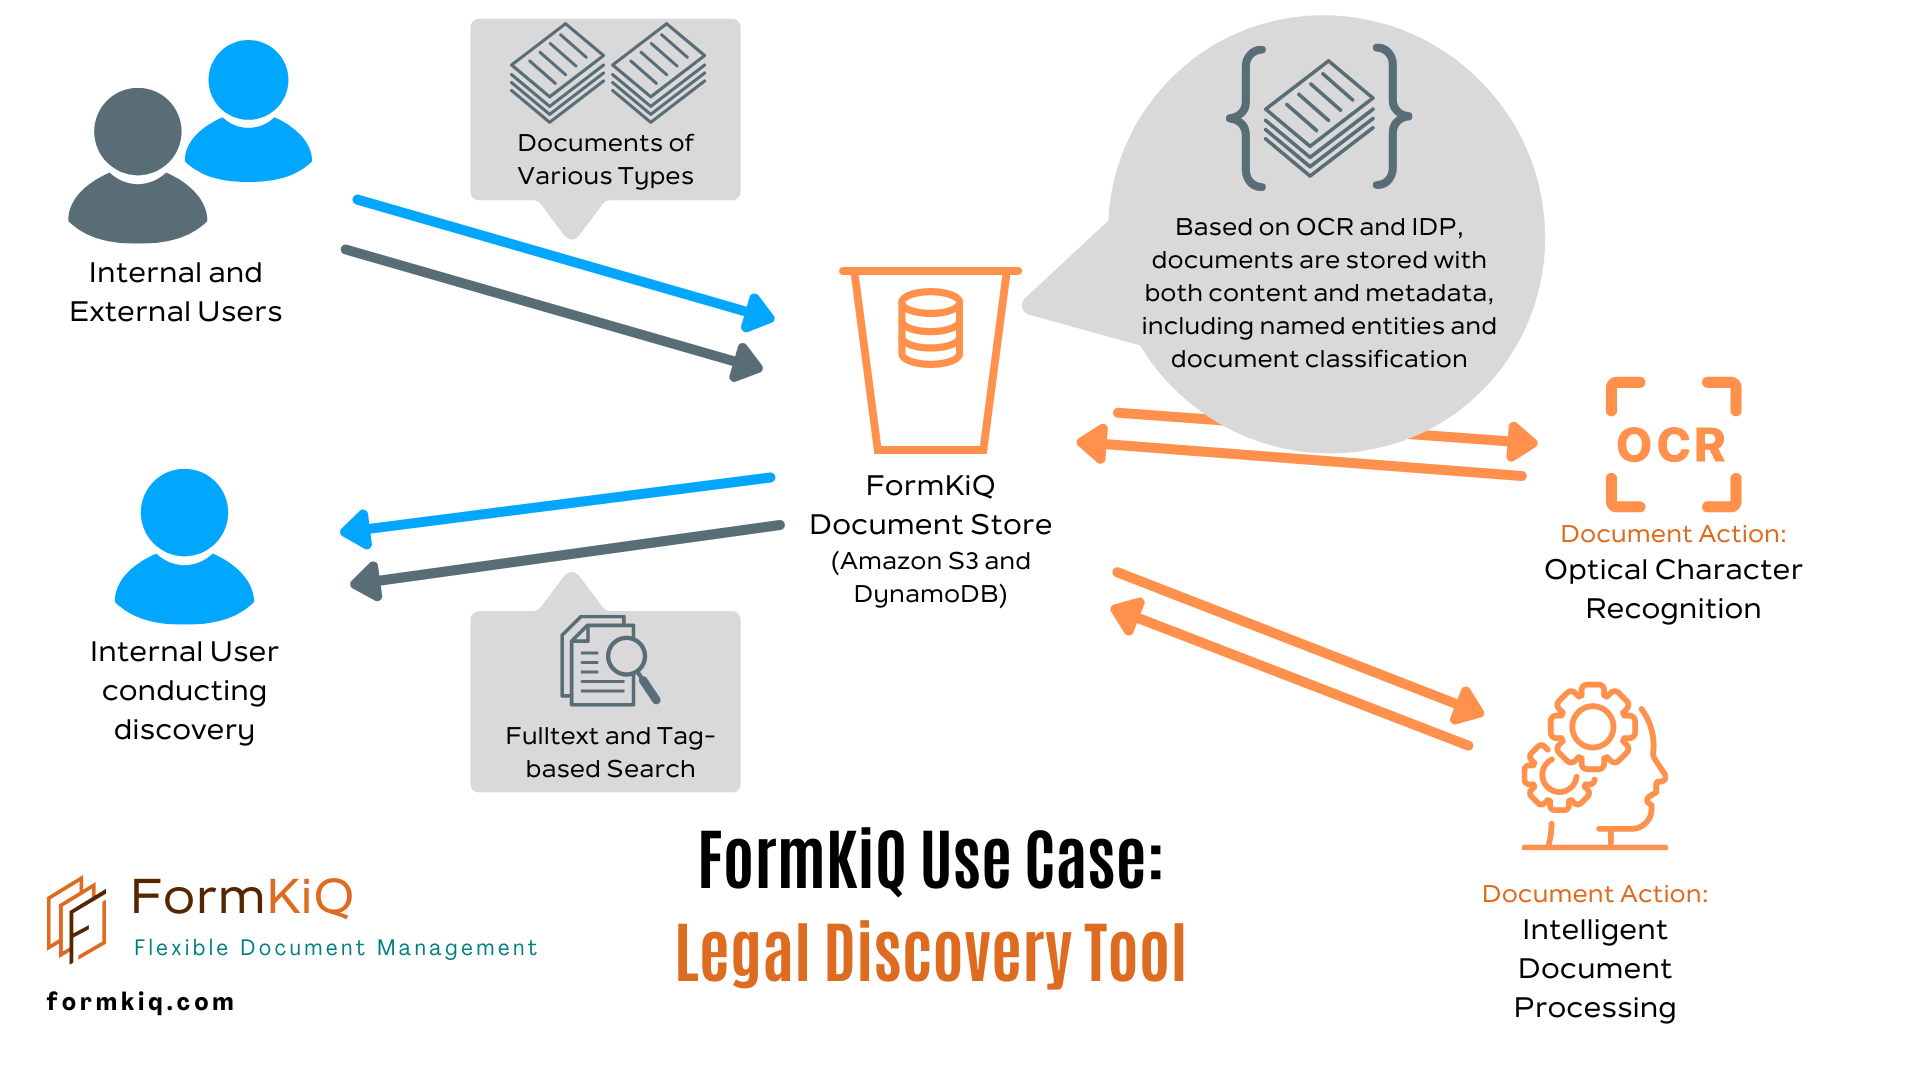 FormKiQ Use Case: Legal Discovery Tool